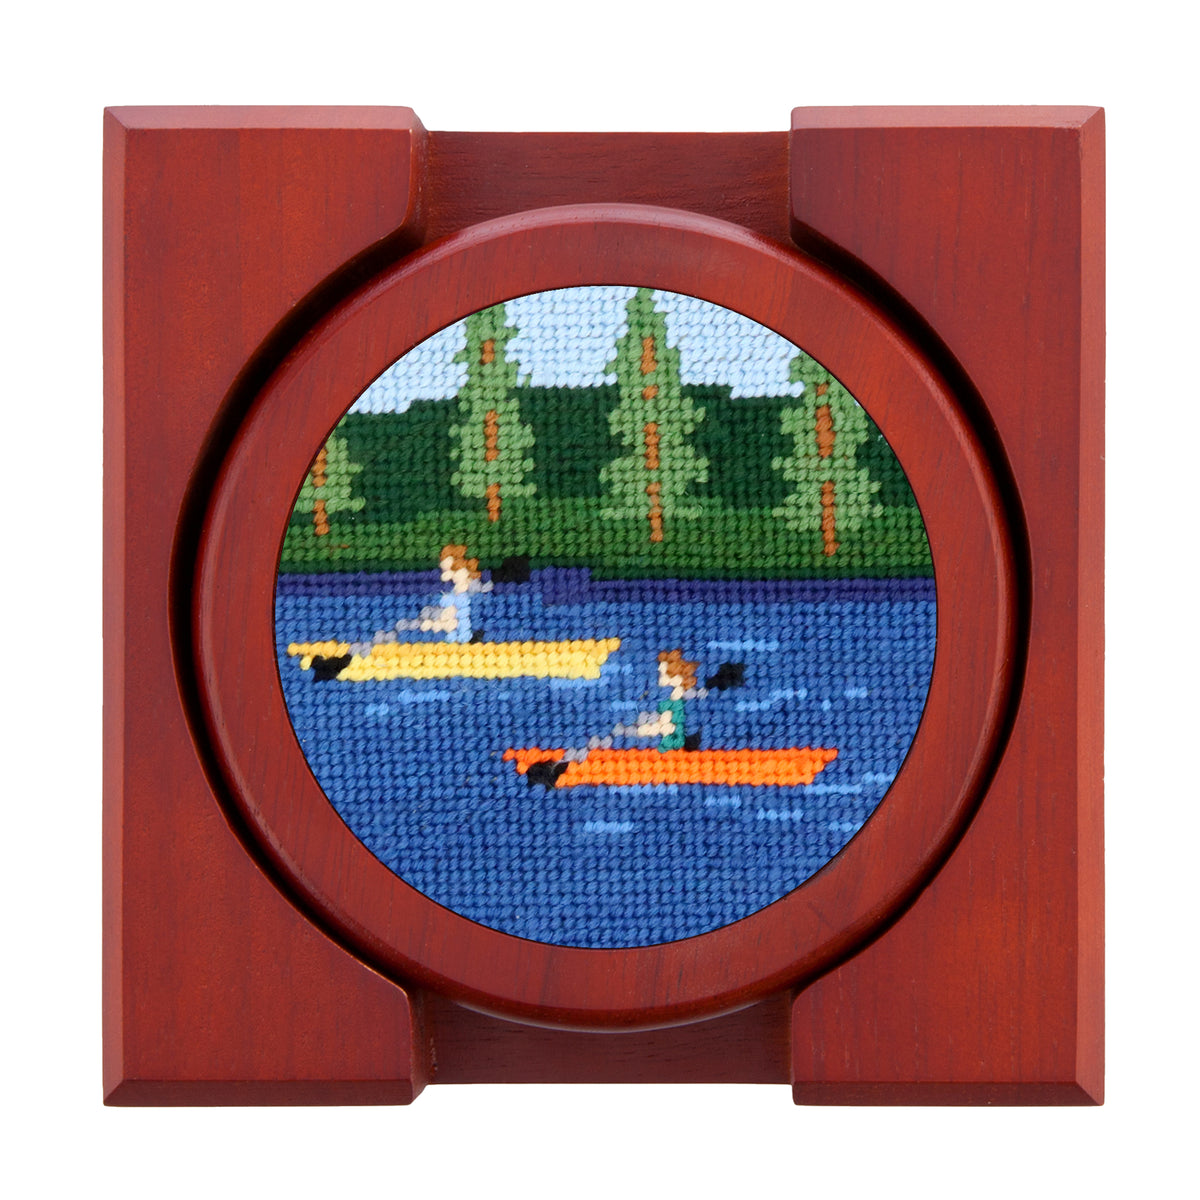 Lake Water Sports Needlepoint Coasters by Smathers & Branson - Country Club Prep